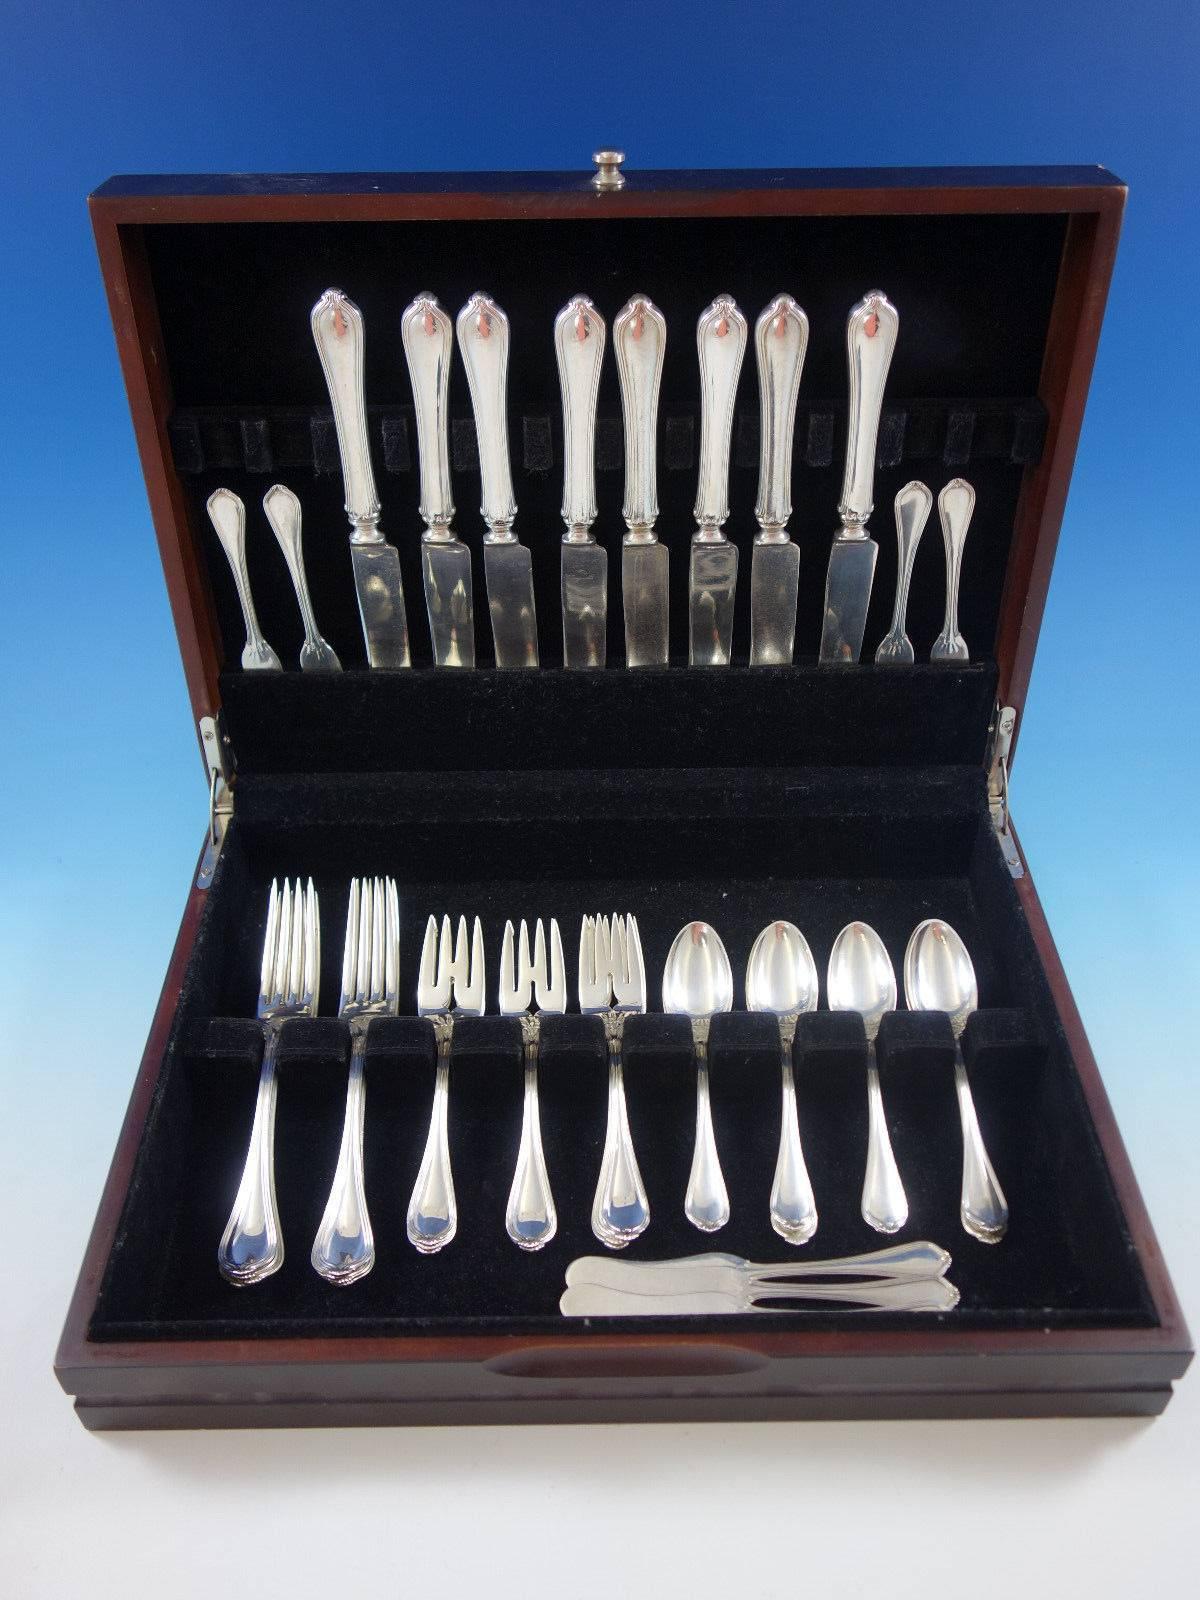 Paul Revere by Towle sterling silver flatware set, 40 pieces. This set includes: 

Eight knives, 8 7/8